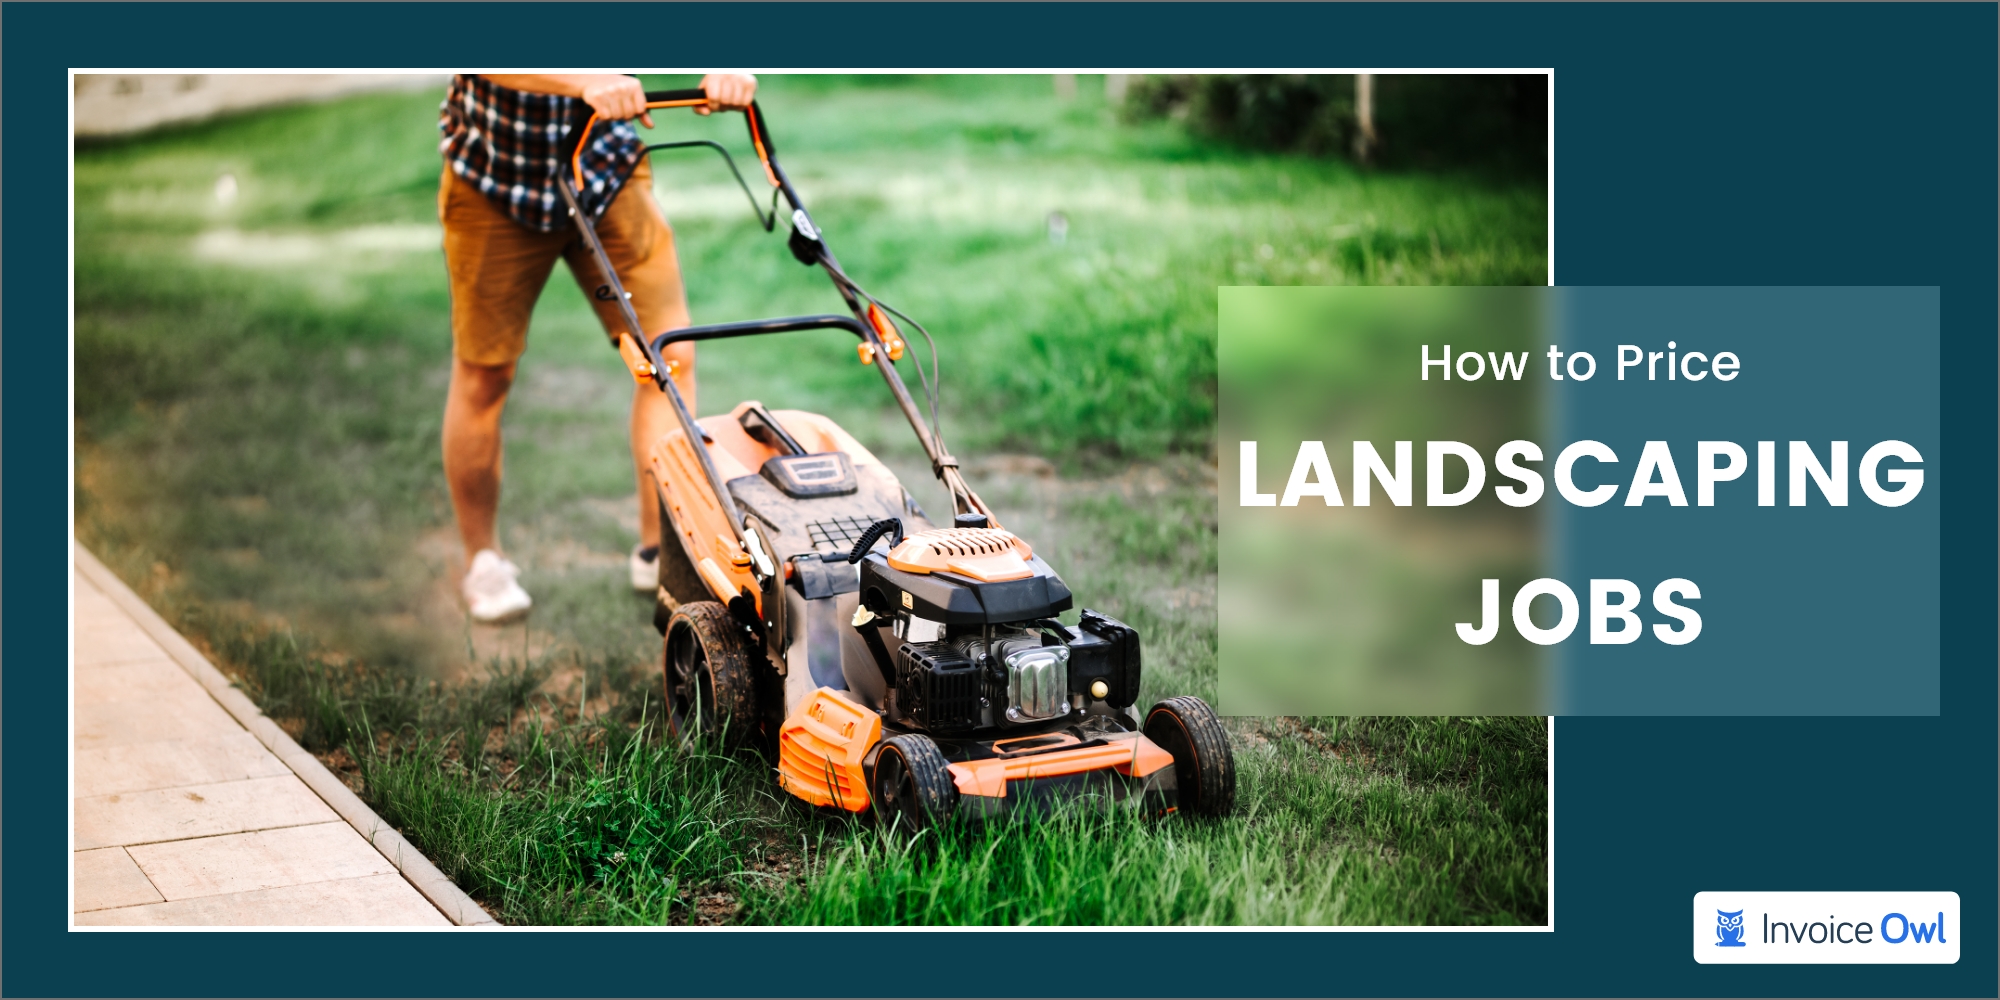 how to price landscaping jobs: how to price landscaping jobs